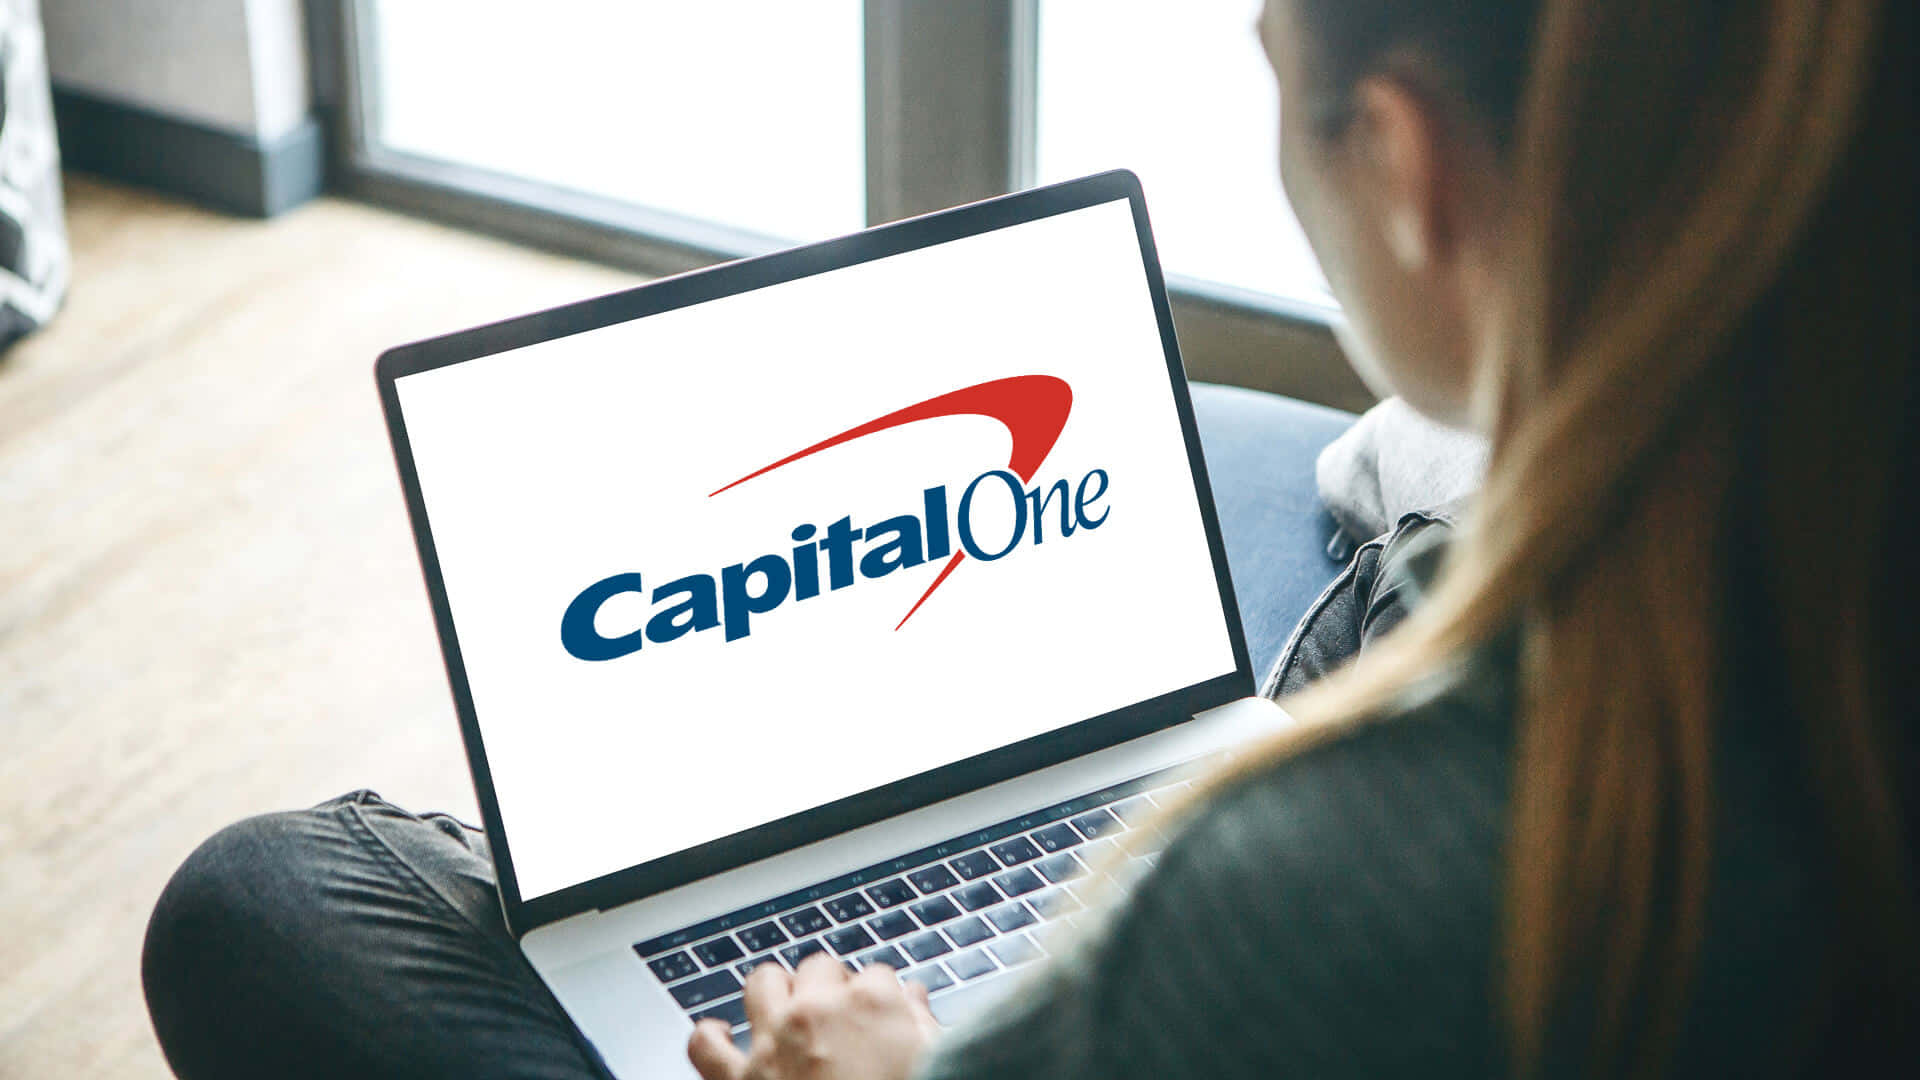 Laptop Screen With Capital One Logo Wallpaper